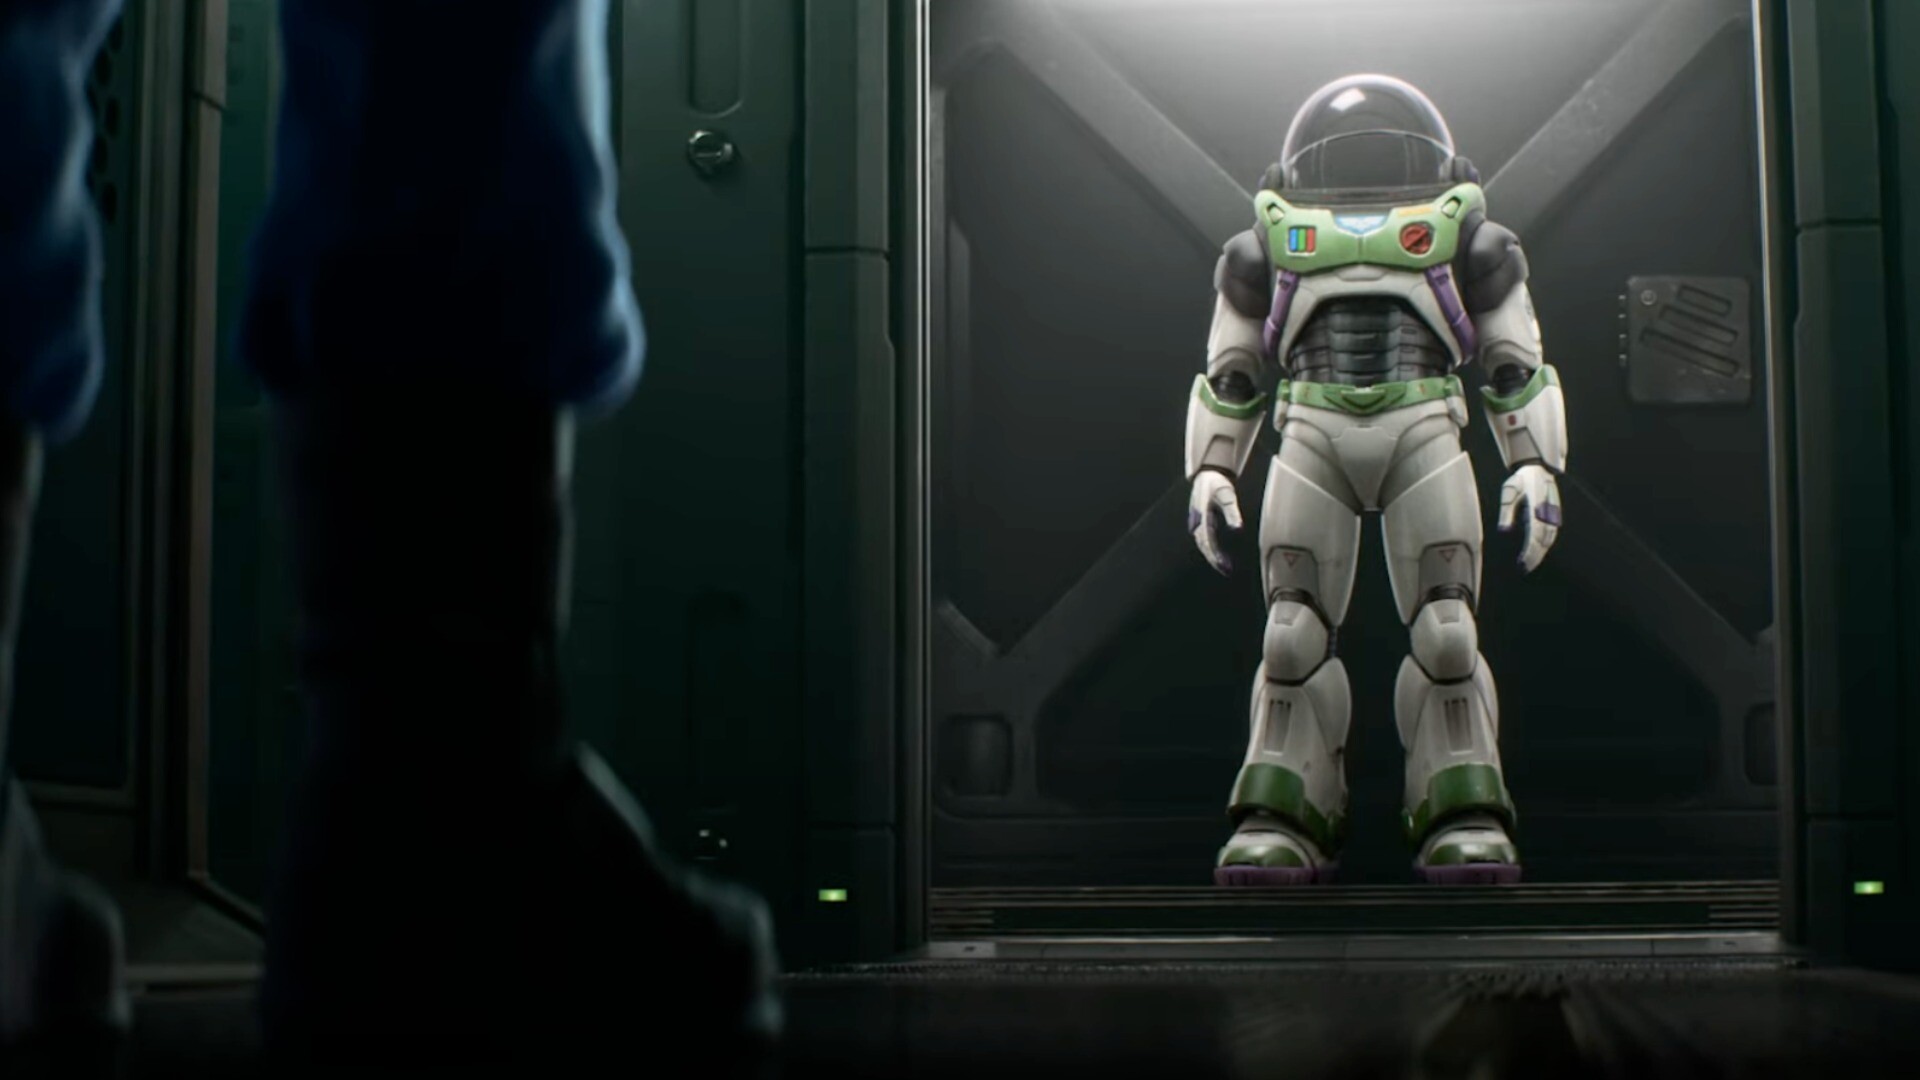 Lightyear (Movie): Space Ranger, marooned on a hostile planet with his commander and crew. 1920x1080 Full HD Wallpaper.